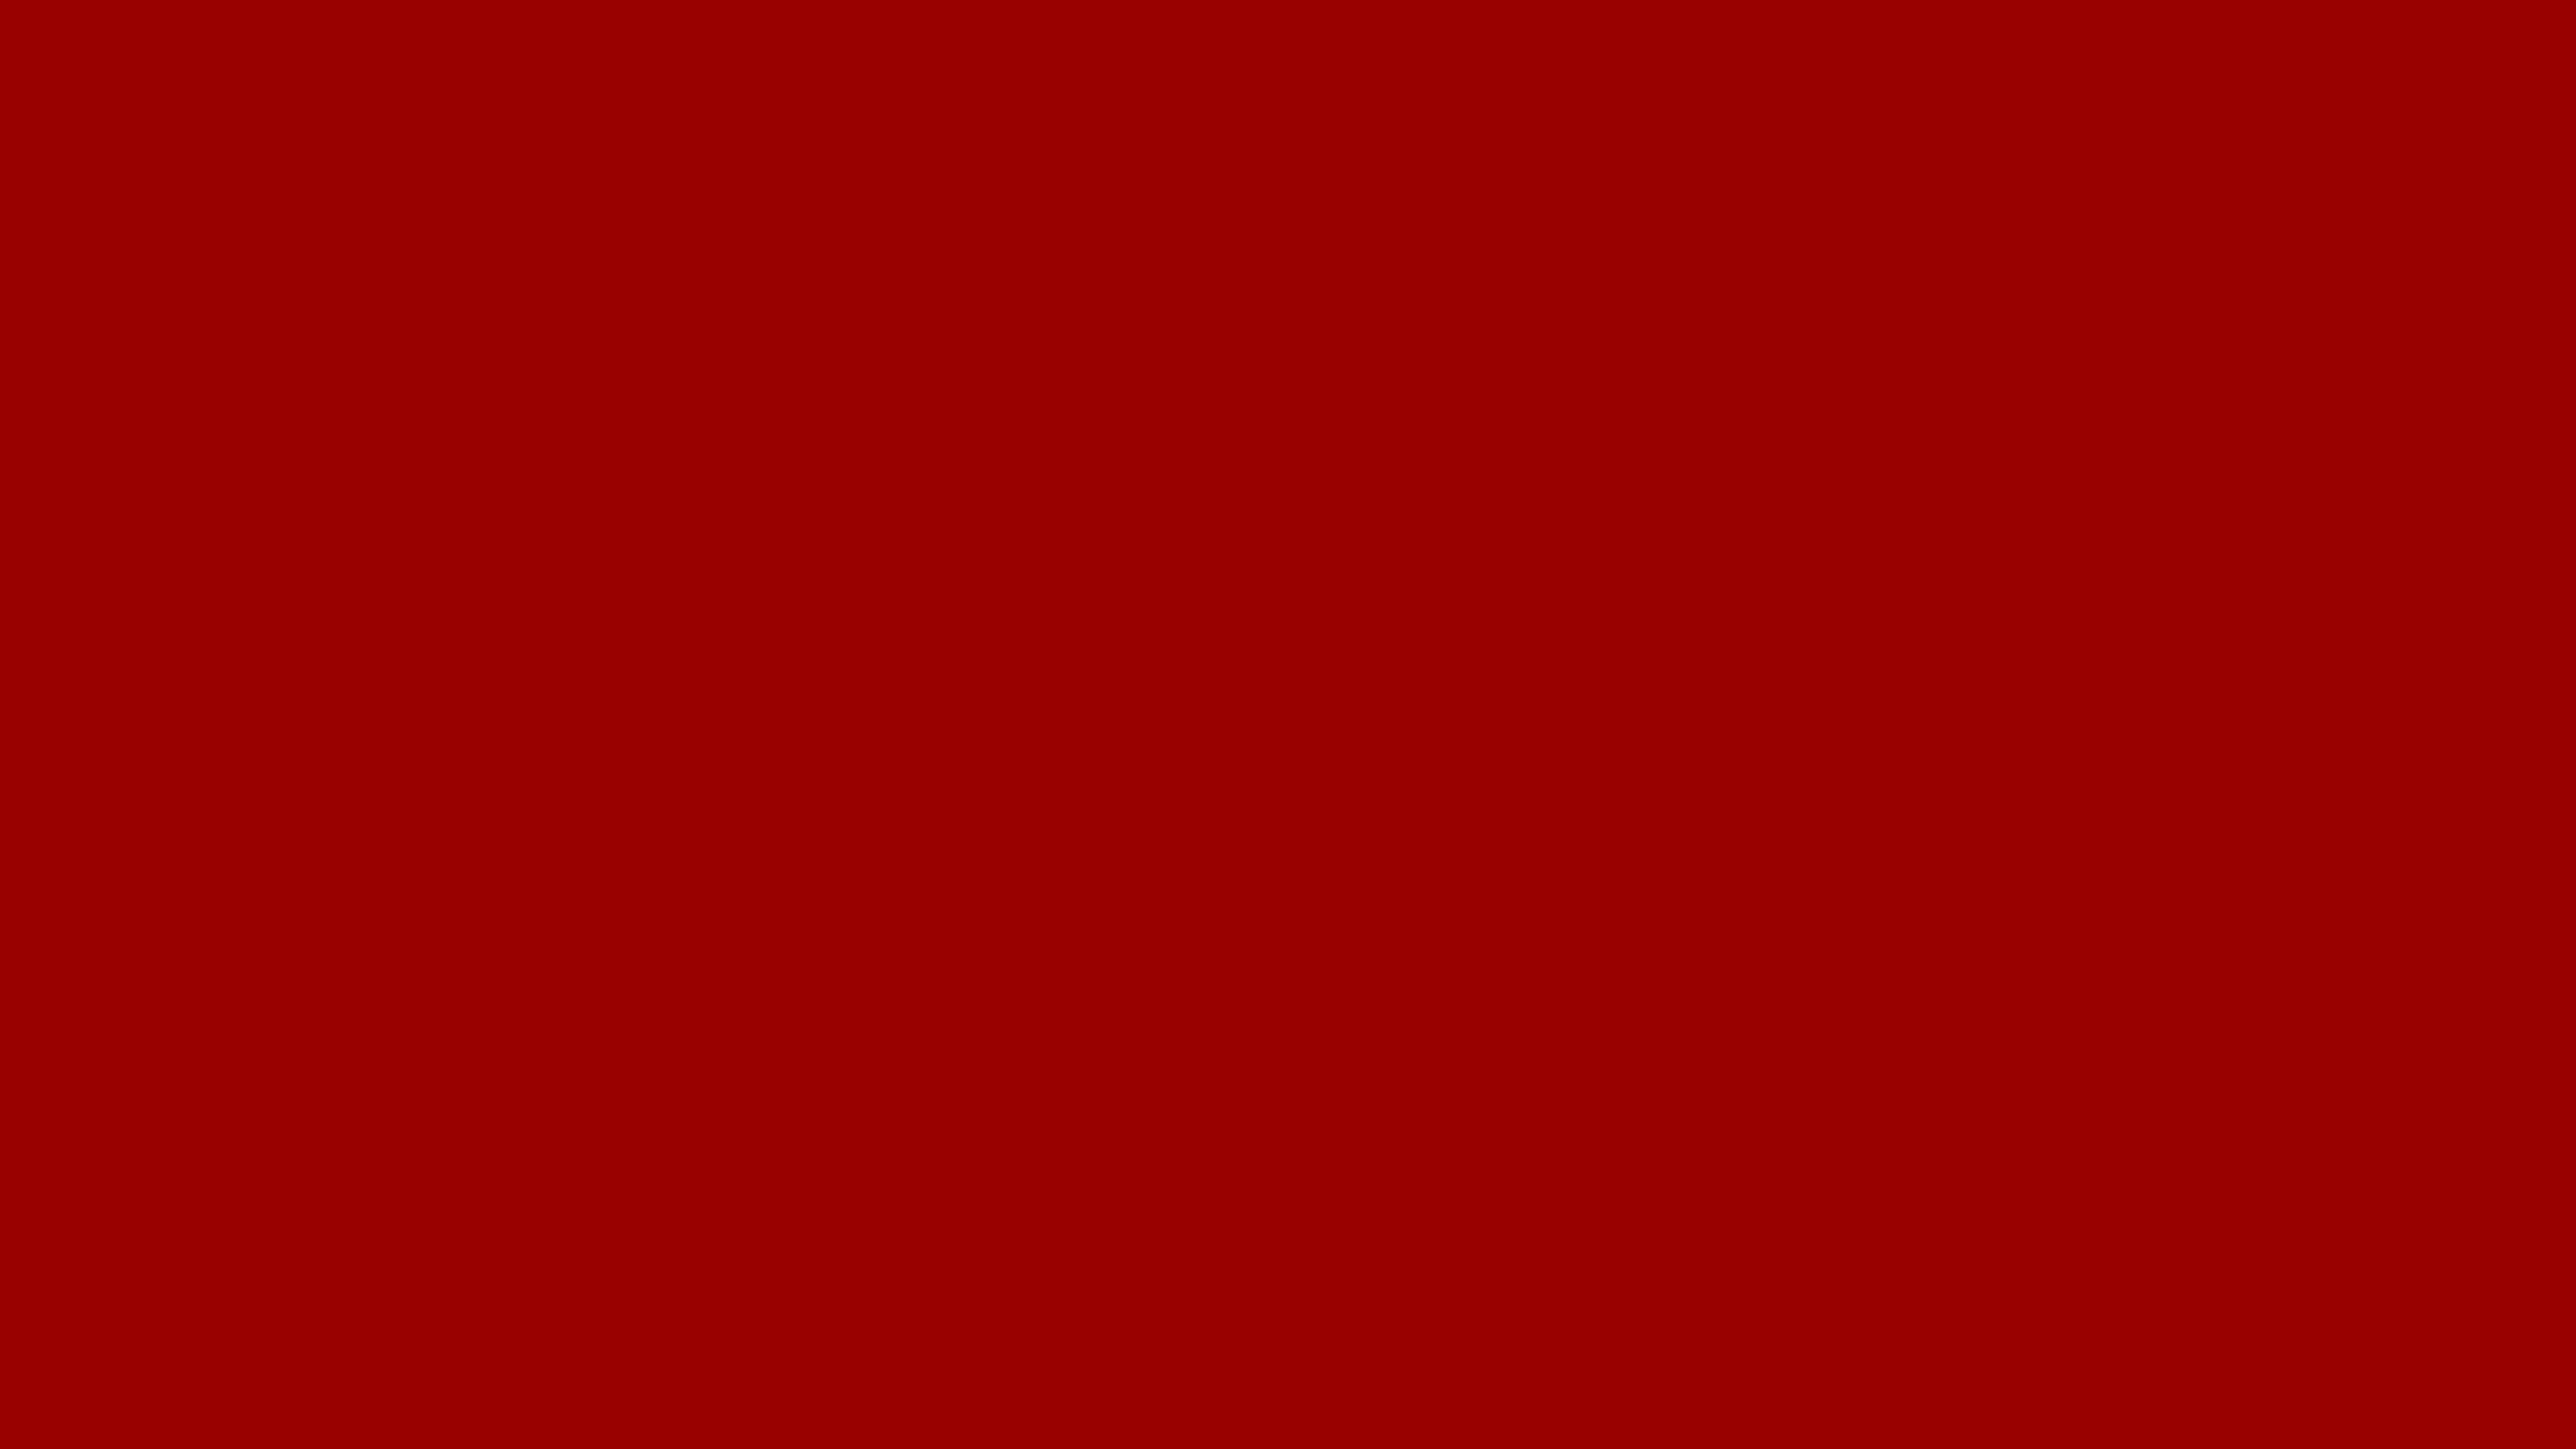 7680x4320 OU Crimson Red Solid Color Background